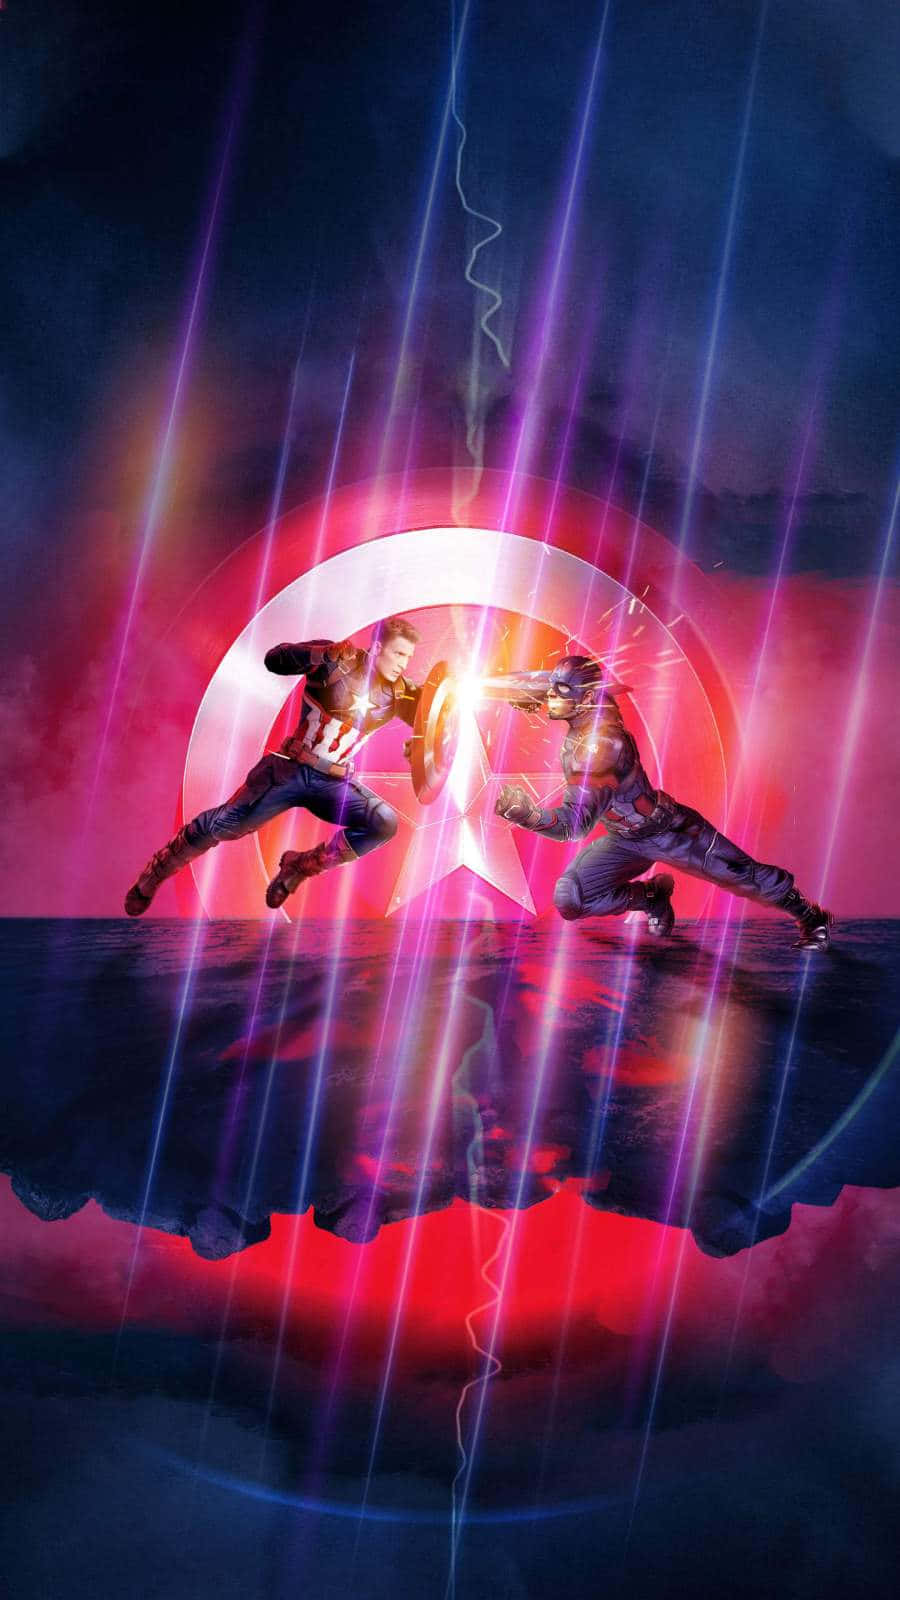 Get Ready To Face The Revengeful Villains With The Modern Avengers Iphone Wallpaper